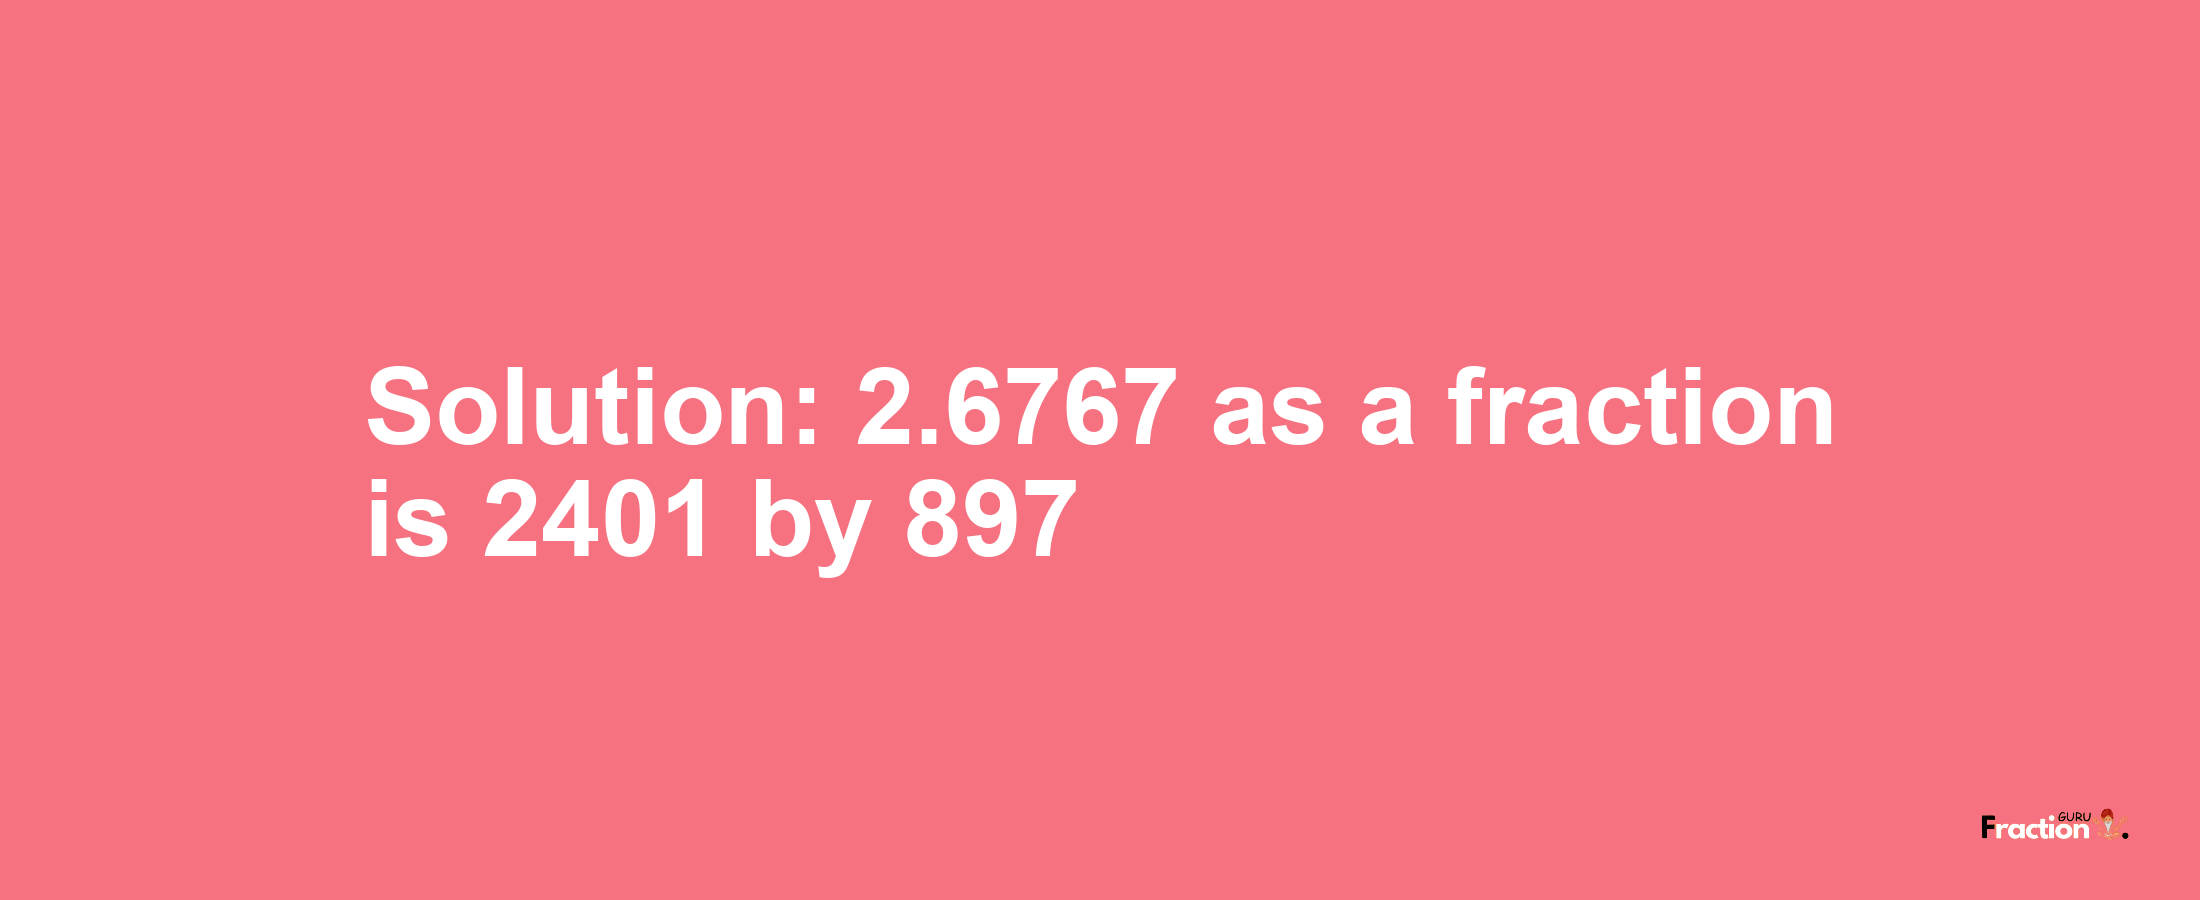 Solution:2.6767 as a fraction is 2401/897